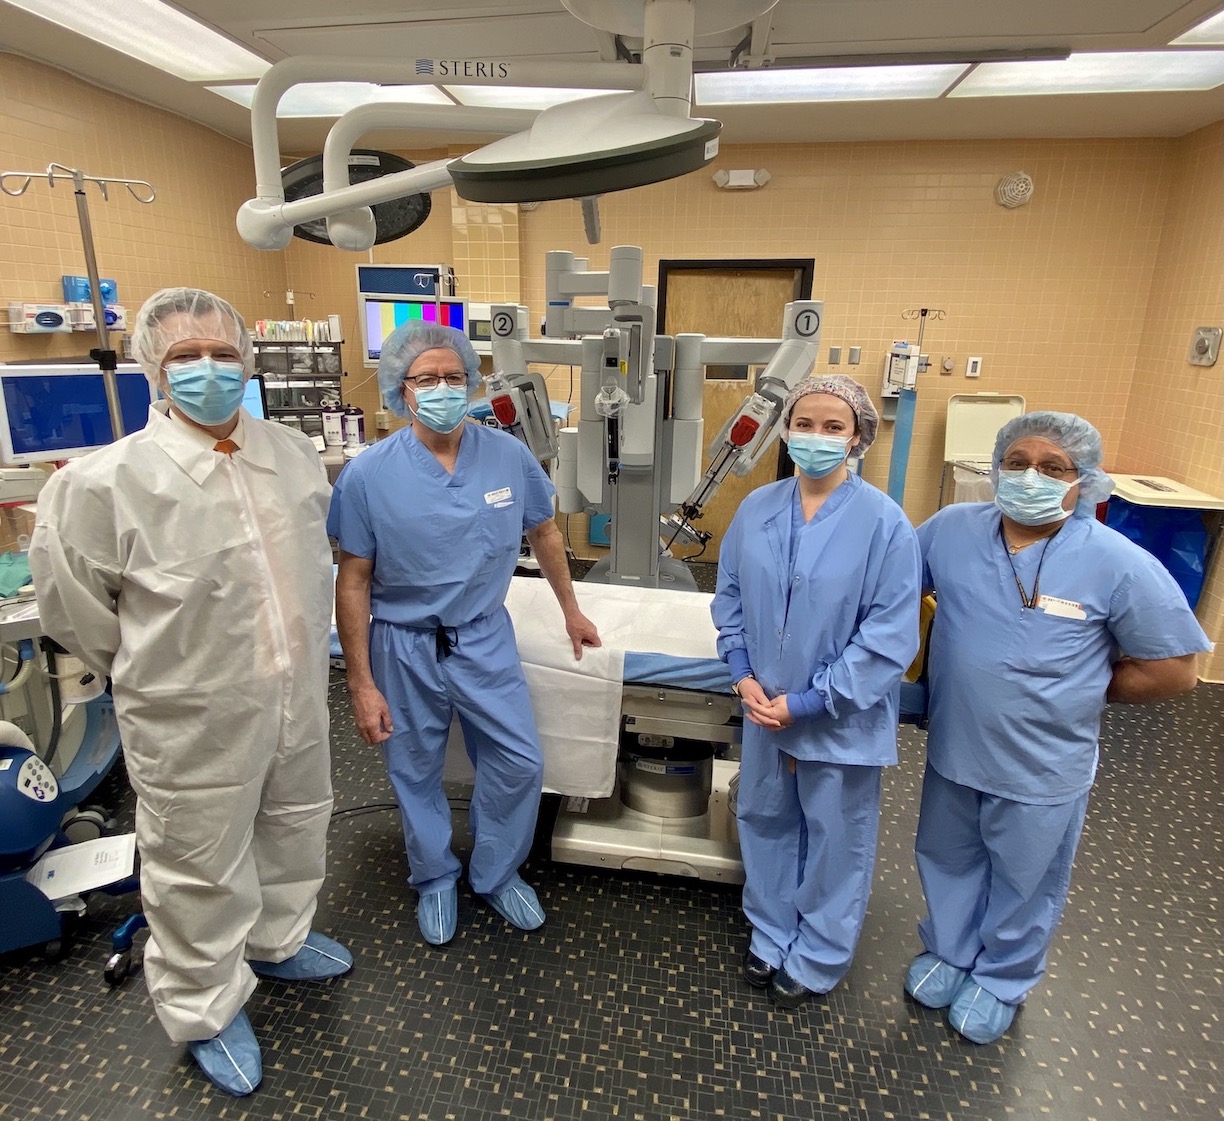 Pictured, from left: CJ Urlaub, general and robotic surgeon Dr. Robert W. Hodge, Amy Vanone and surgical tech Richard Loucks.